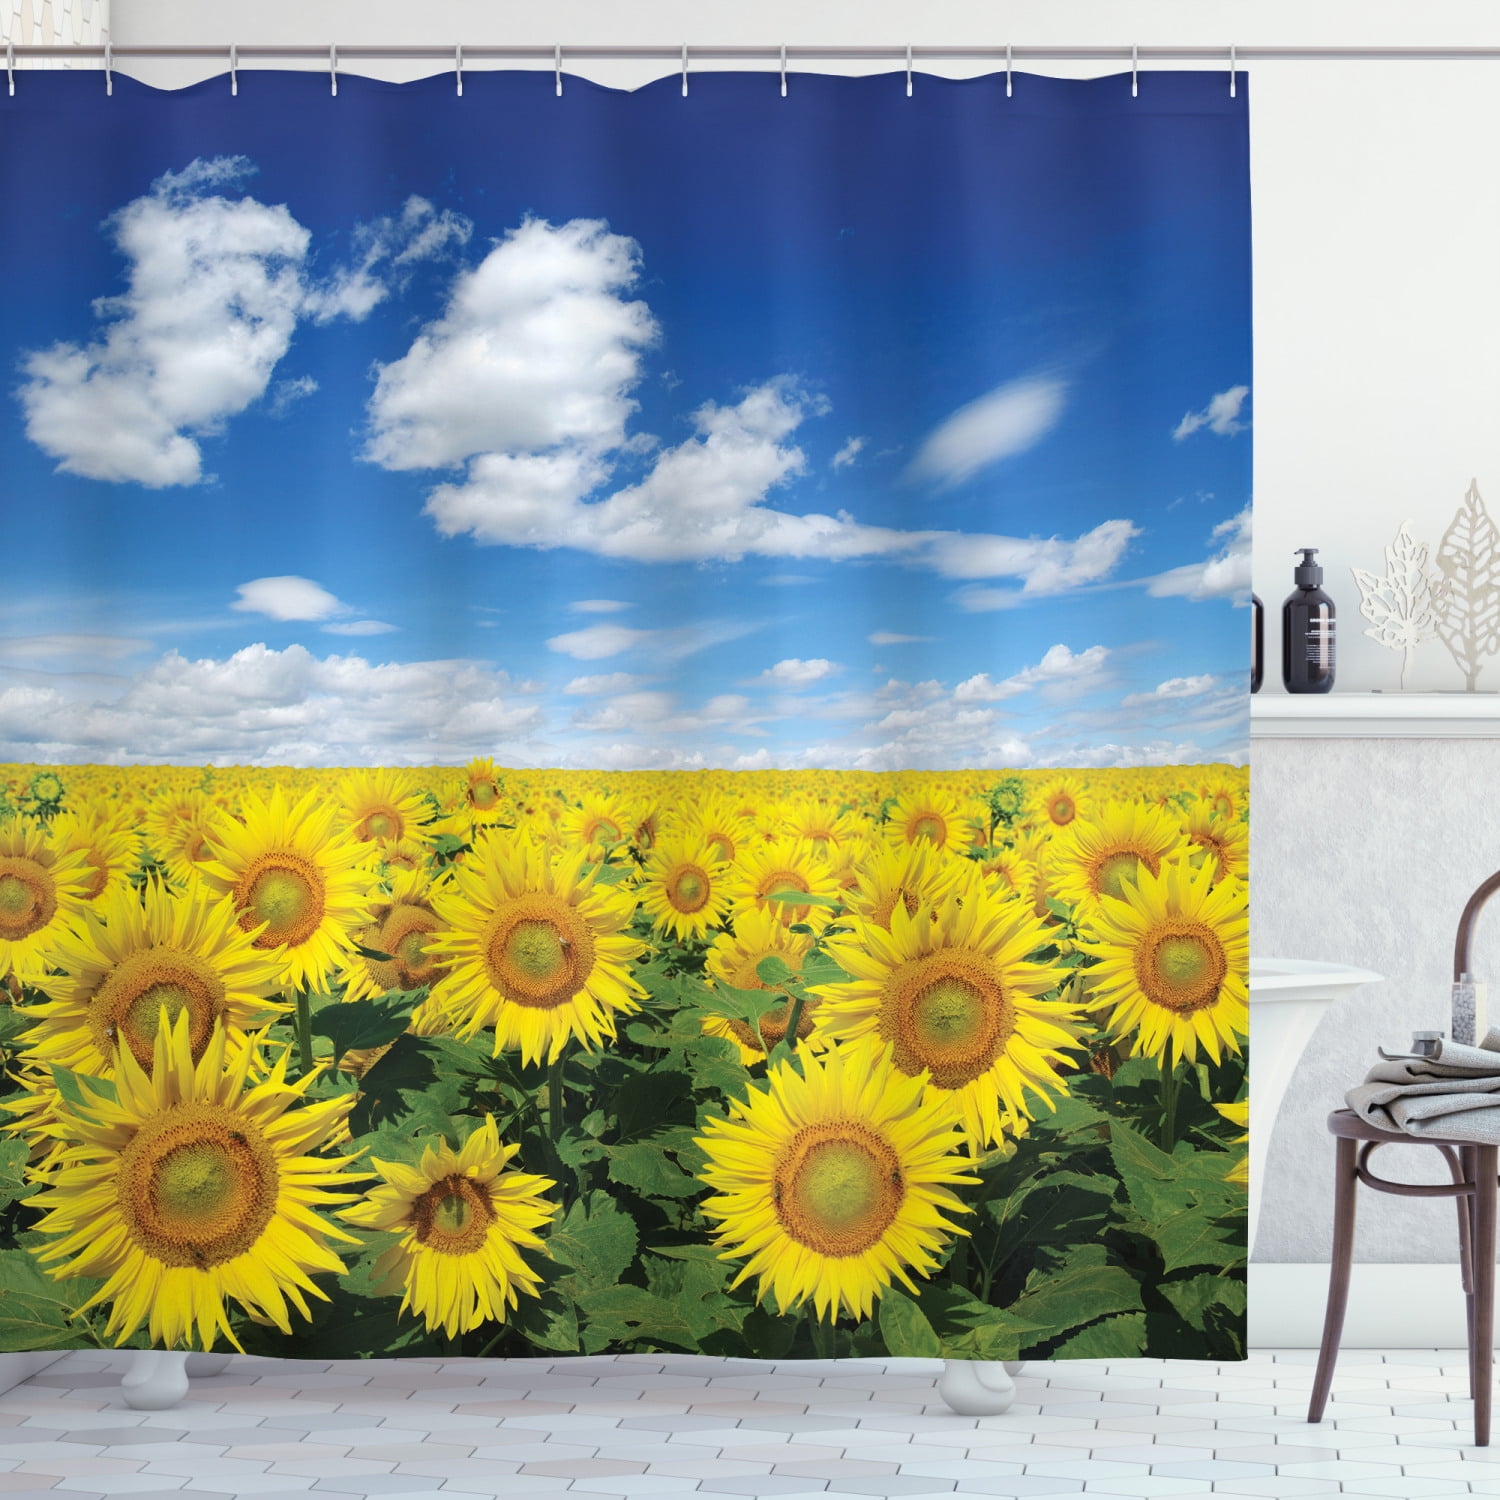 Details about   Watercolor Spring sunflowers Bird House Waterproof Fabric Shower Curtain Set 72"